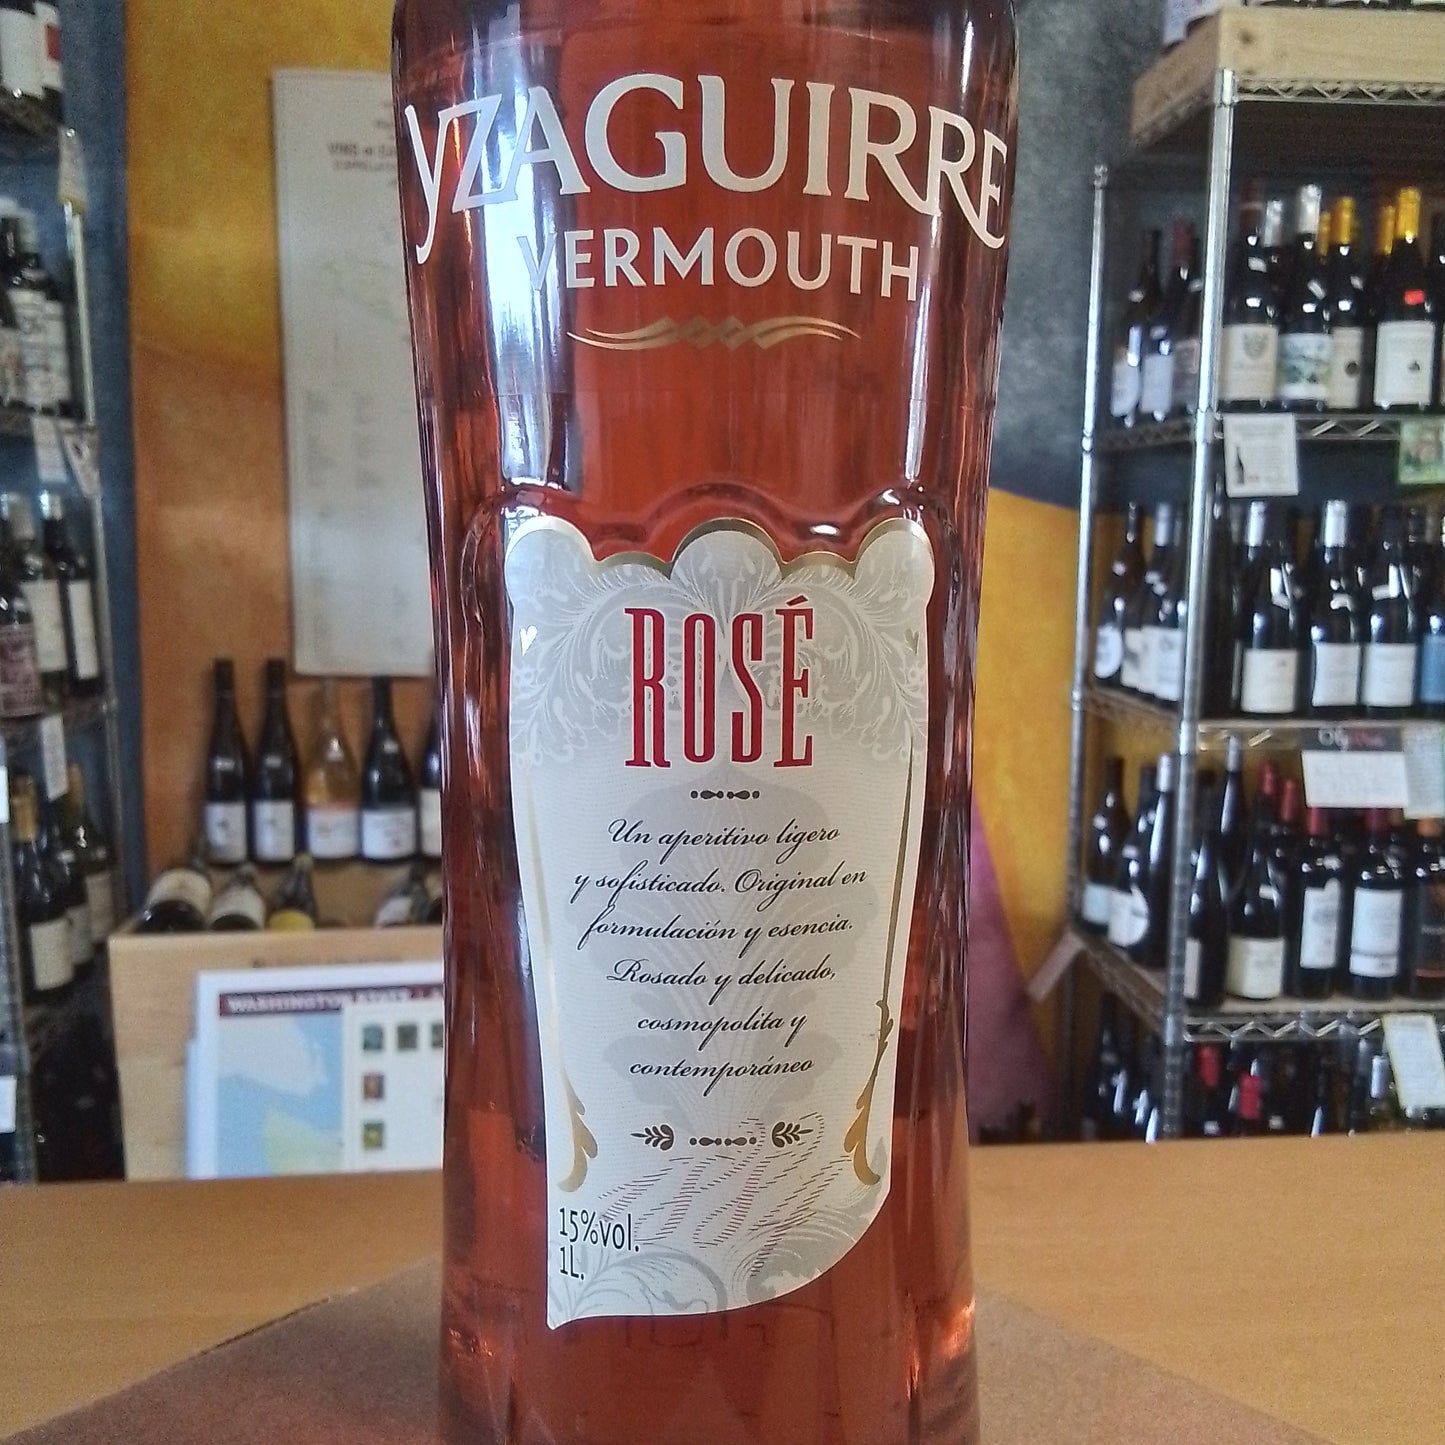 BODEGAS YZAGUIRRE Vermouth Rose (Spain)